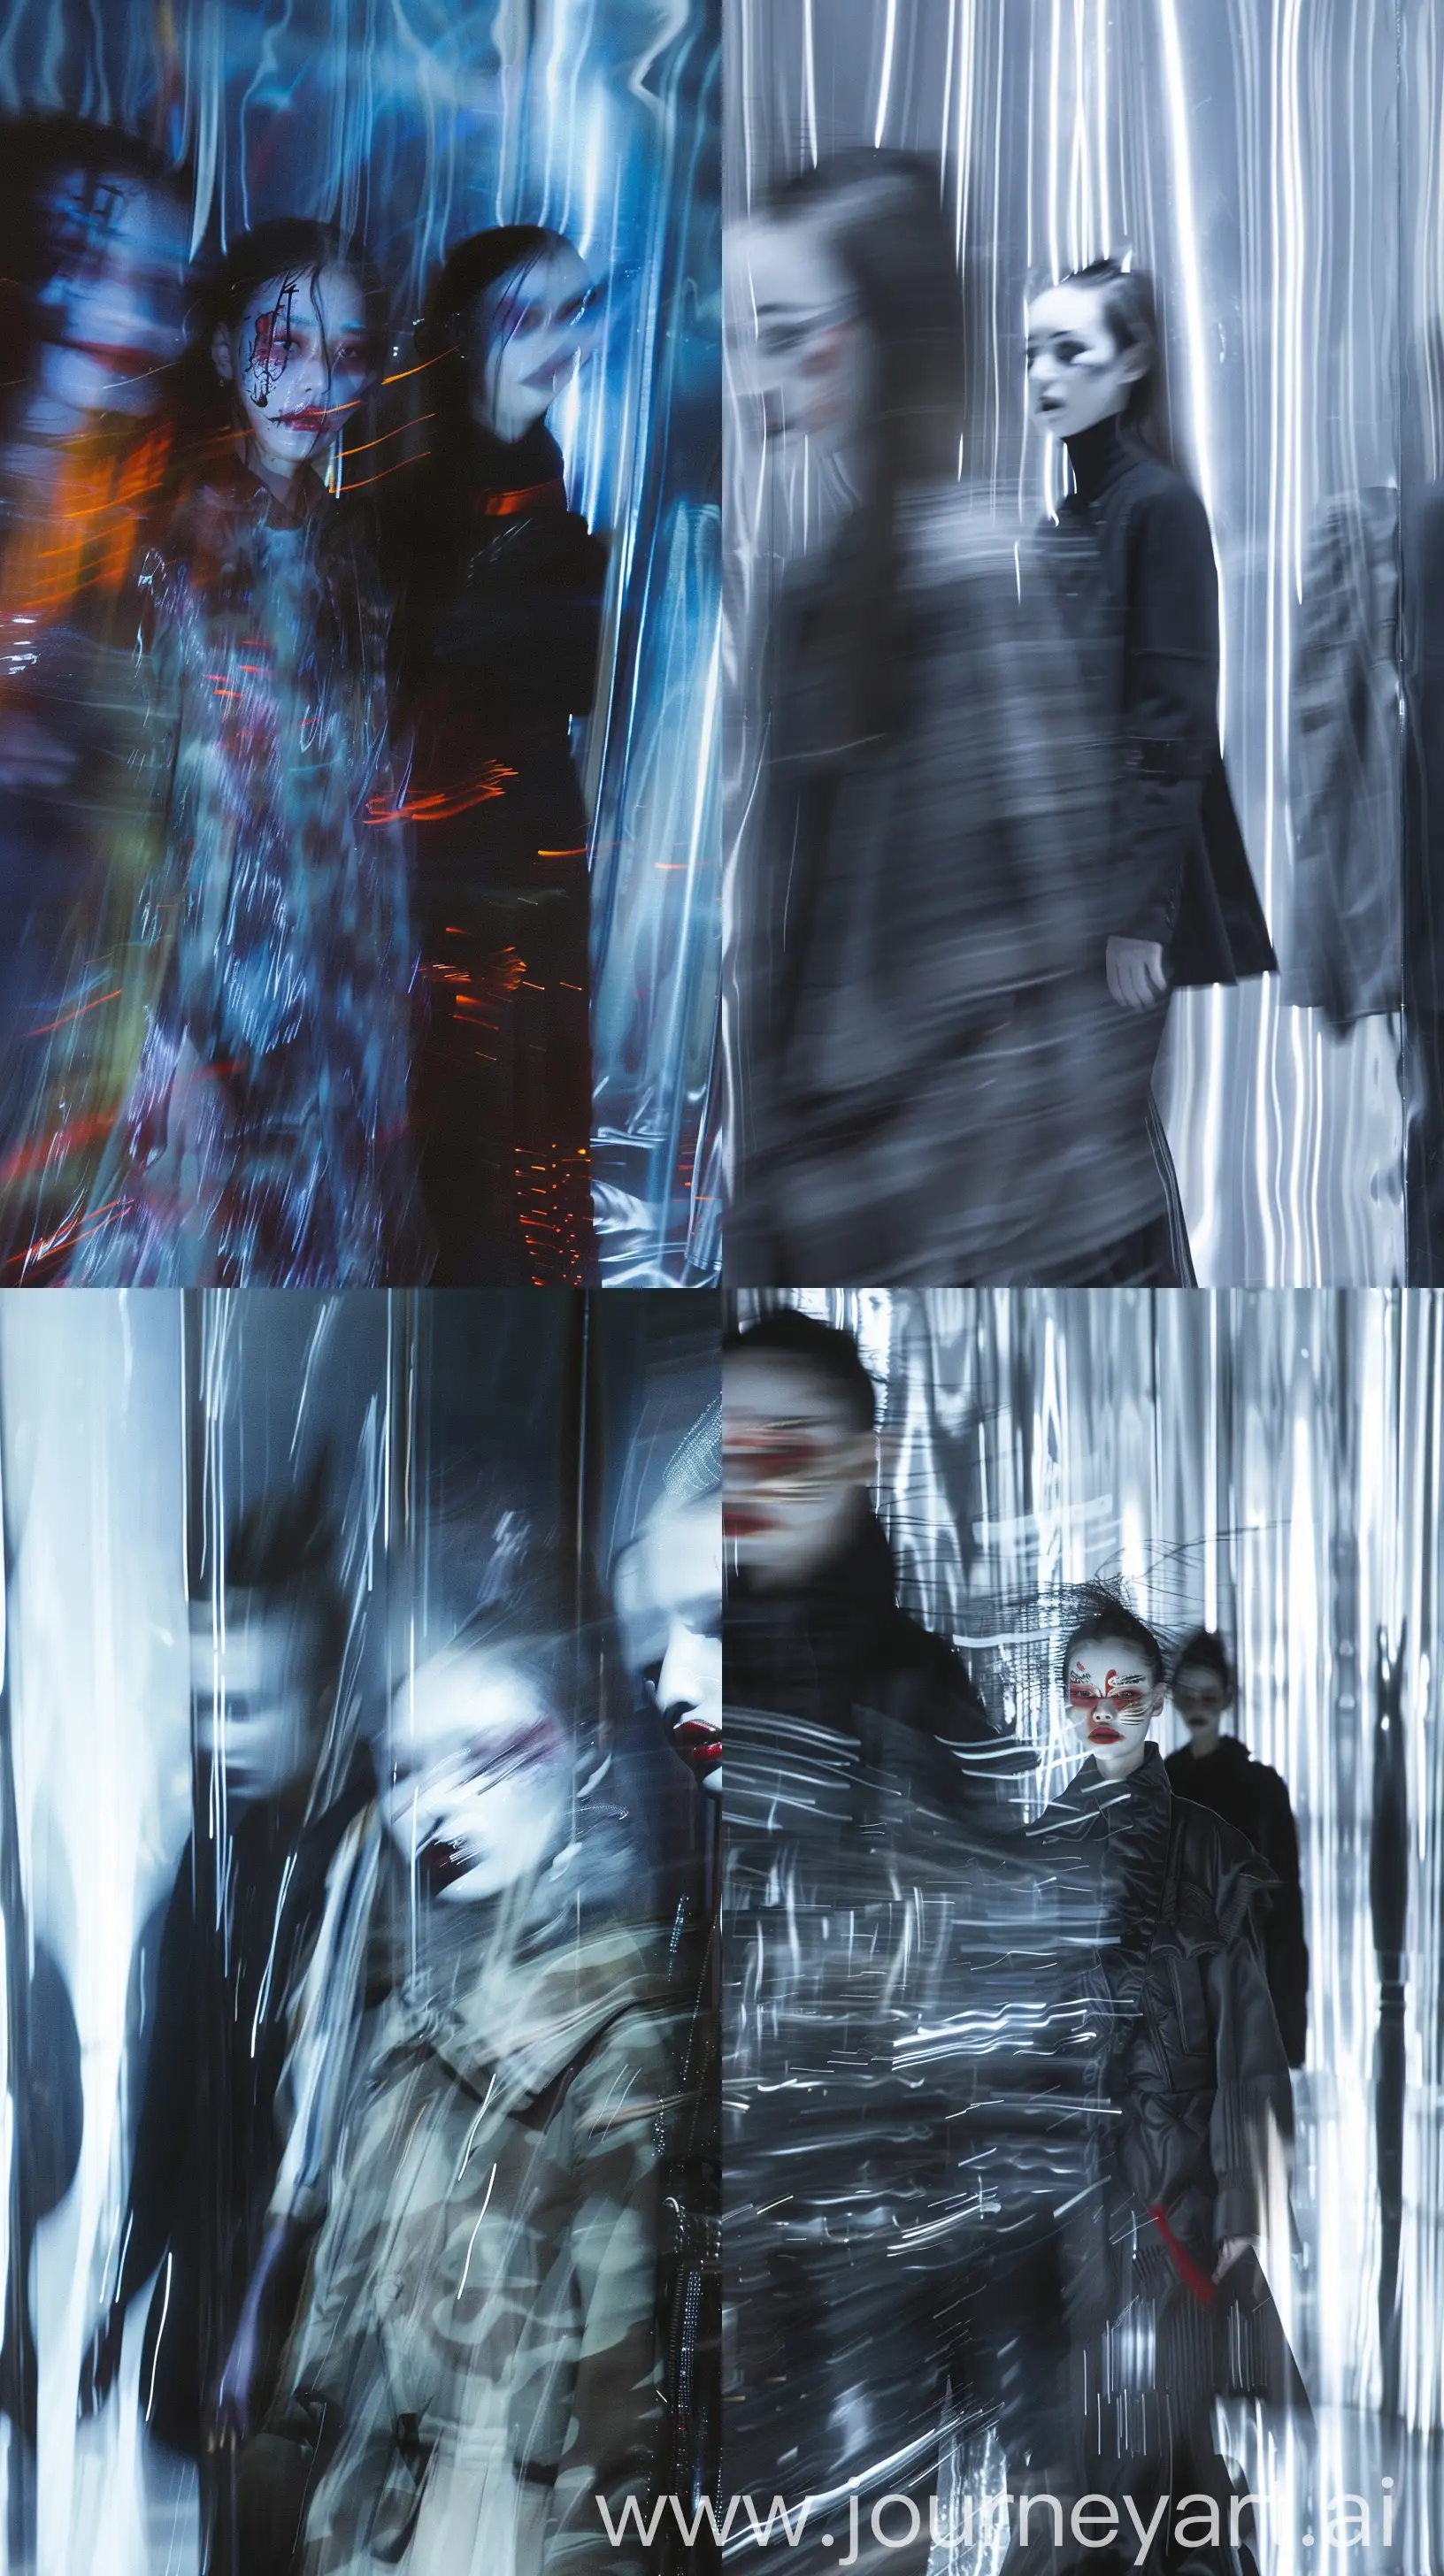 Create image image, blurred oriental balenciaga female models figures are depicted against a chromed background. wounded make up, The motion blur creates a ghostly, ethereal effect, with clothing details obscured. One figure in the foreground appears to be wearing a oversized horror high fashion blackout,  The lighting and blur lend a mysterious, almost haunting quality to the scene, nocturnal fashion scene --ar 9:16